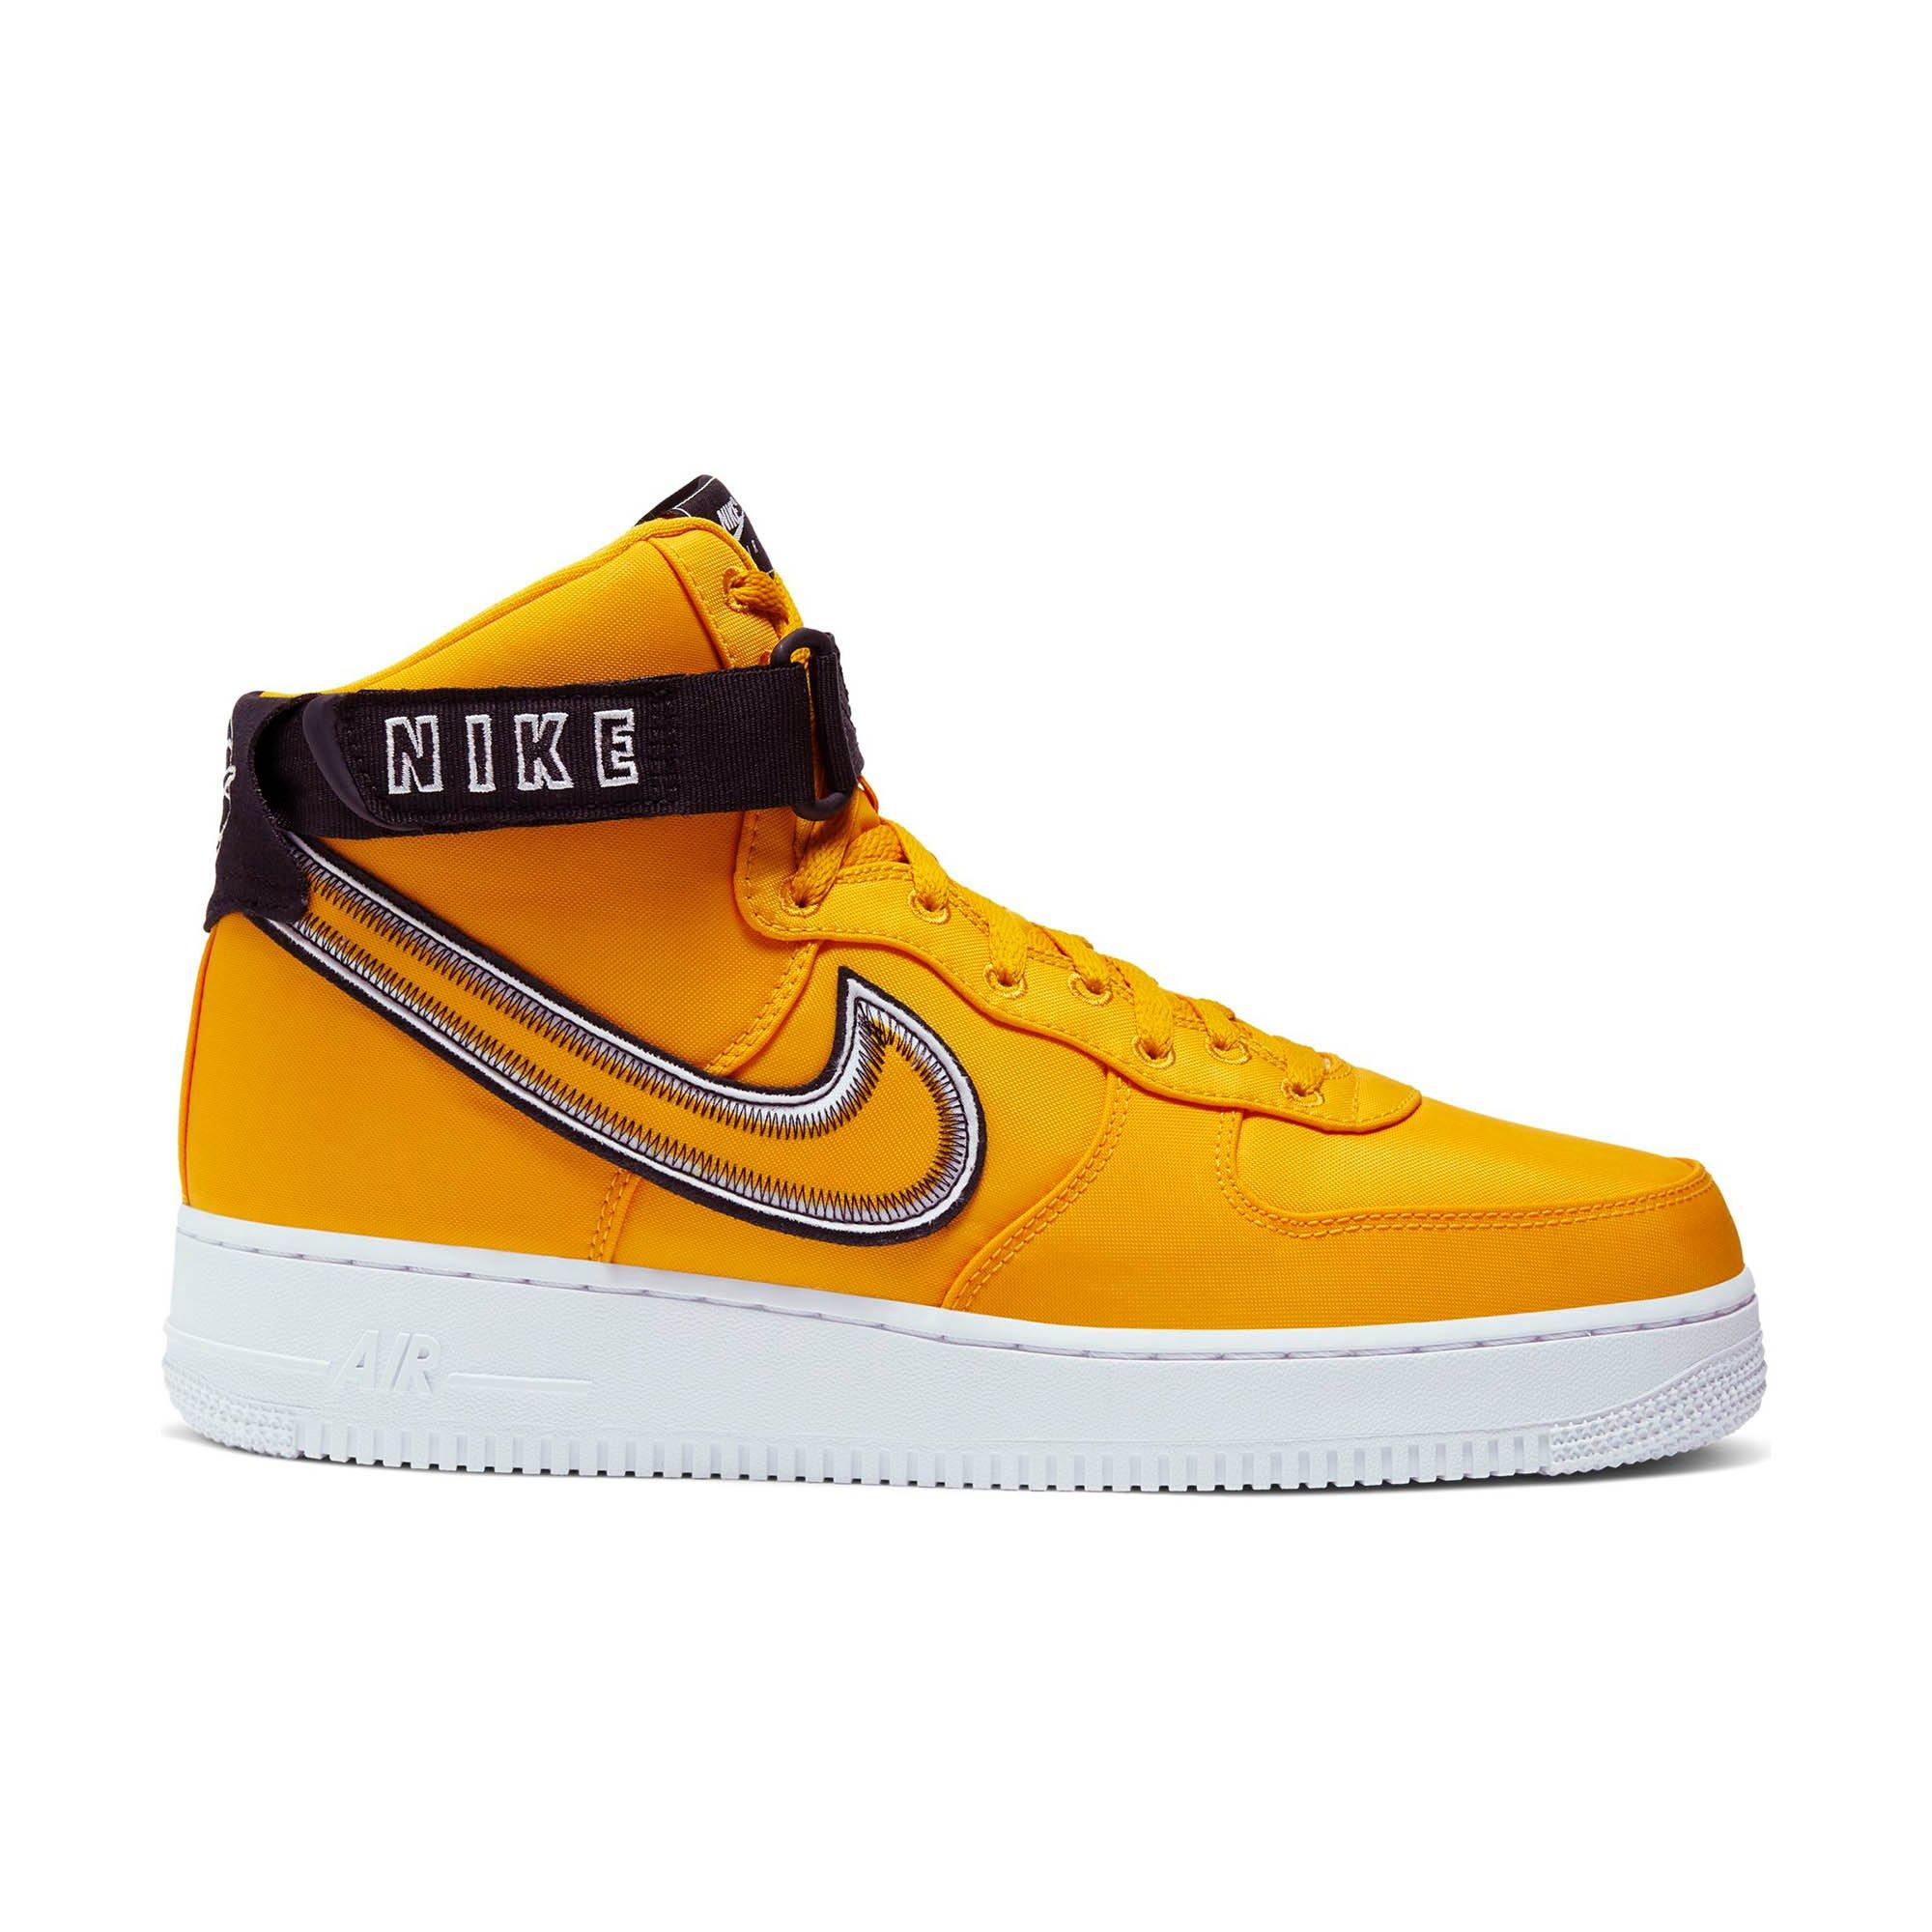 nike air force 1 high top with strap on back